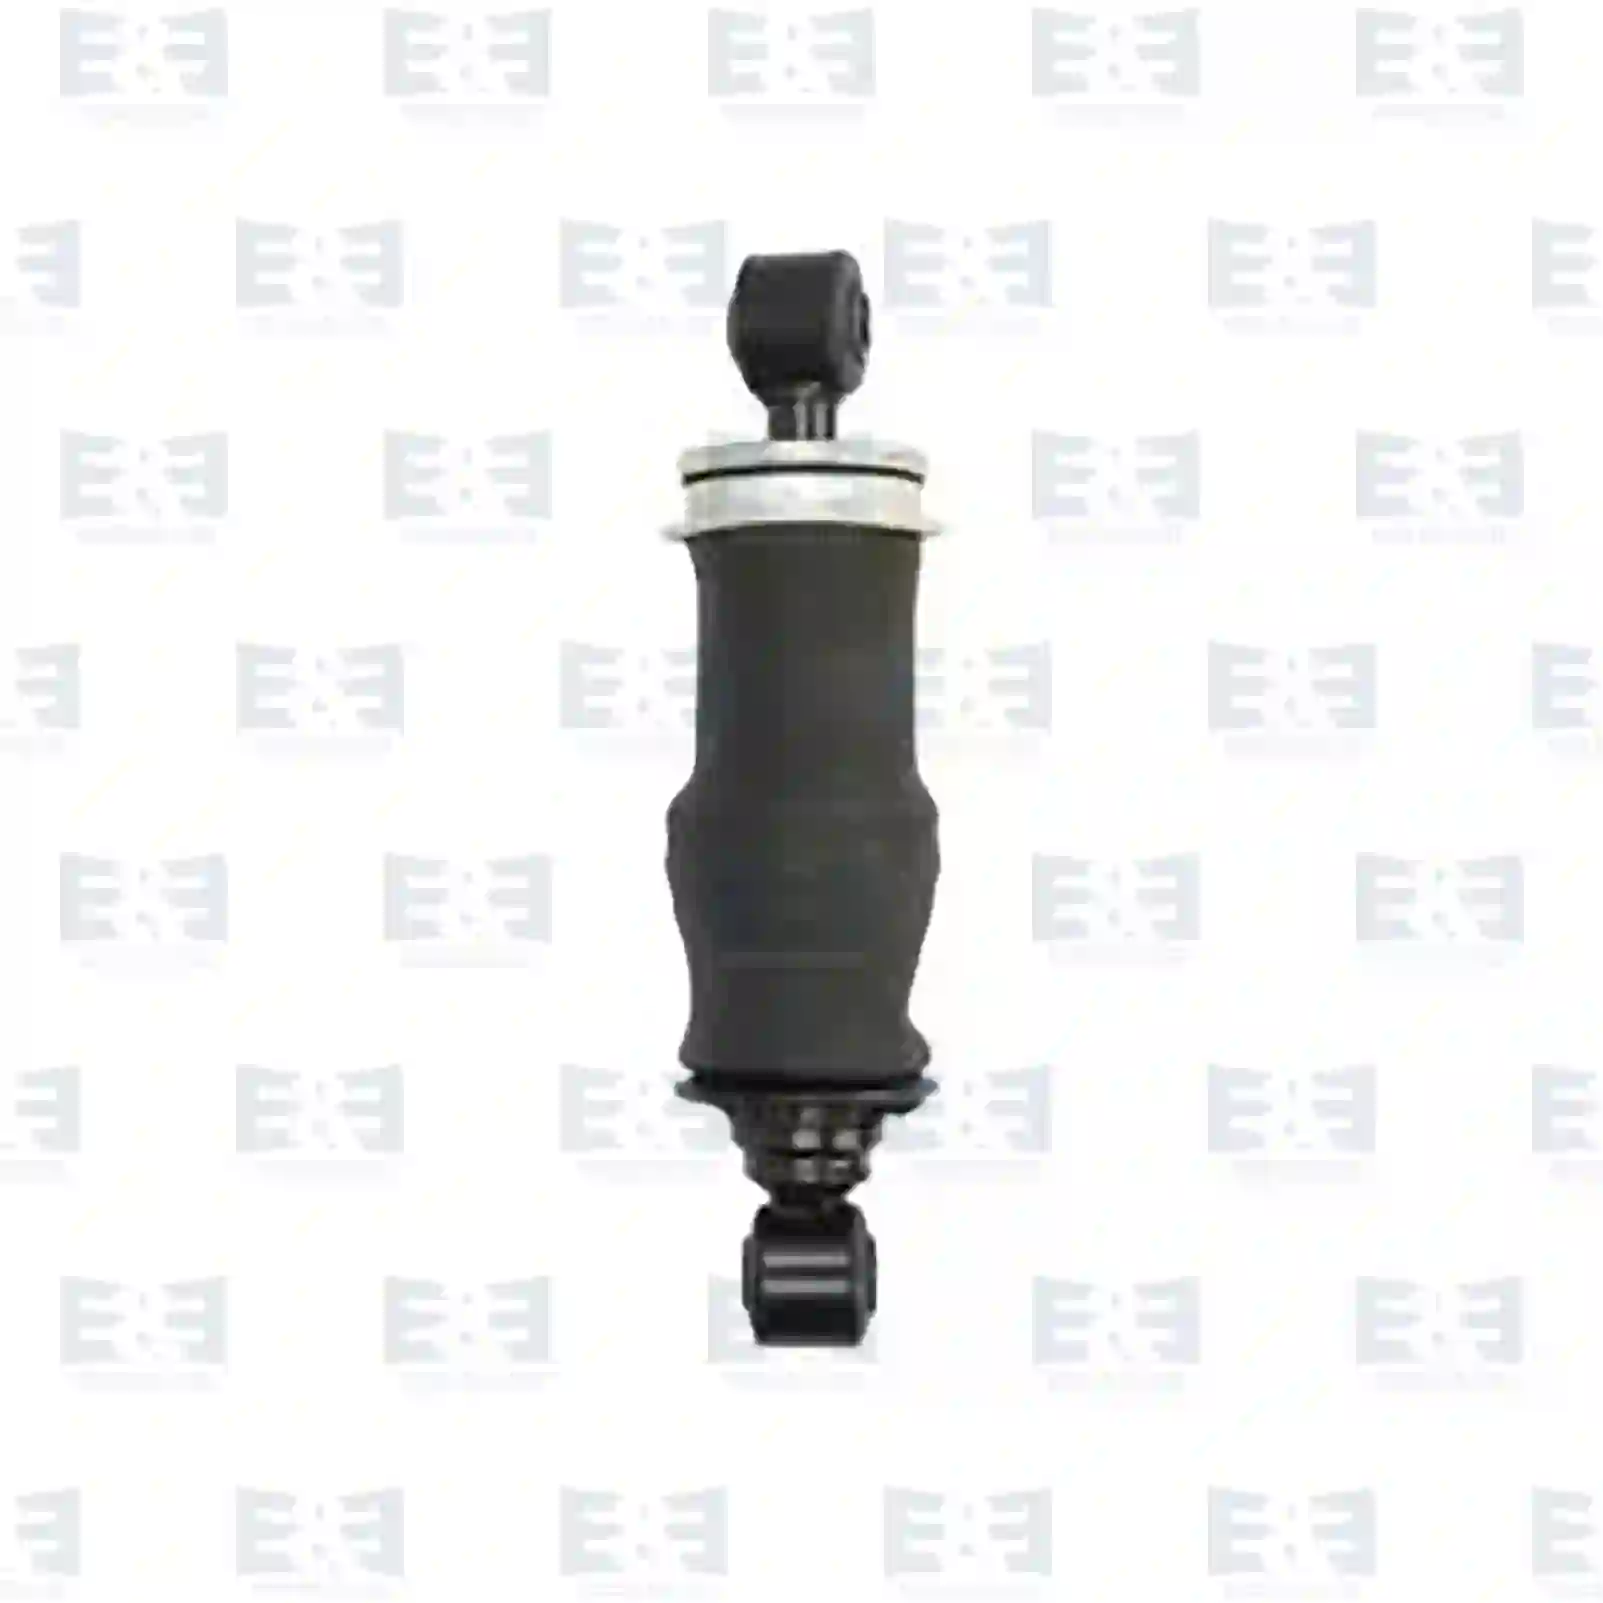 Cabin shock absorber, with air bellow, 2E2275517, 500340706, , , ||  2E2275517 E&E Truck Spare Parts | Truck Spare Parts, Auotomotive Spare Parts Cabin shock absorber, with air bellow, 2E2275517, 500340706, , , ||  2E2275517 E&E Truck Spare Parts | Truck Spare Parts, Auotomotive Spare Parts